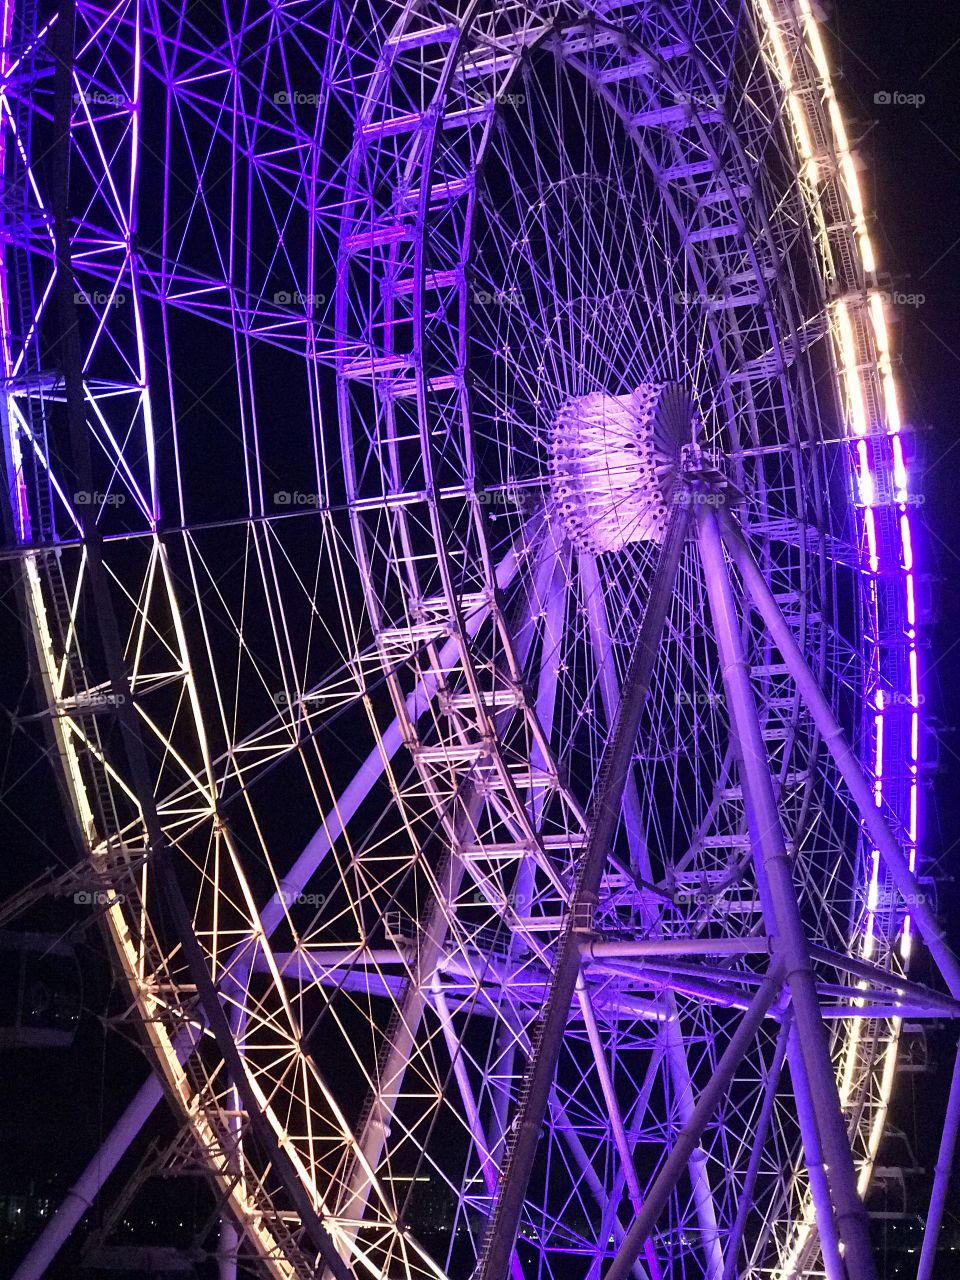 .odnalrO ni detacol tneduts FCU nA  .asleS yb kcilC Follow me @Selsa.Notes, @Selsa.Clicks, or @Selsa.Quotes.  The Orlando Eye.  Bought by CocaCola, July 28, 2016.  Was a business investment to be able to observe the city from the ferris wheel that stands 400 feet high.  It spins at a very slow rate and cost $25 to ride. Total of 75 photos in this album of the Coca Cola eye.  The colors displayed on the daily basis is red & white representing classic coke.  Green every once in a while for the sugar cane coke.  Then the rainbow colors sadly represent the Pulse shooting victims and the solid blue is for the law enforcement officers killed in the line of duty.  Officer Baxter and Sgt. Howard.  Rest in Heavenly Peace. 